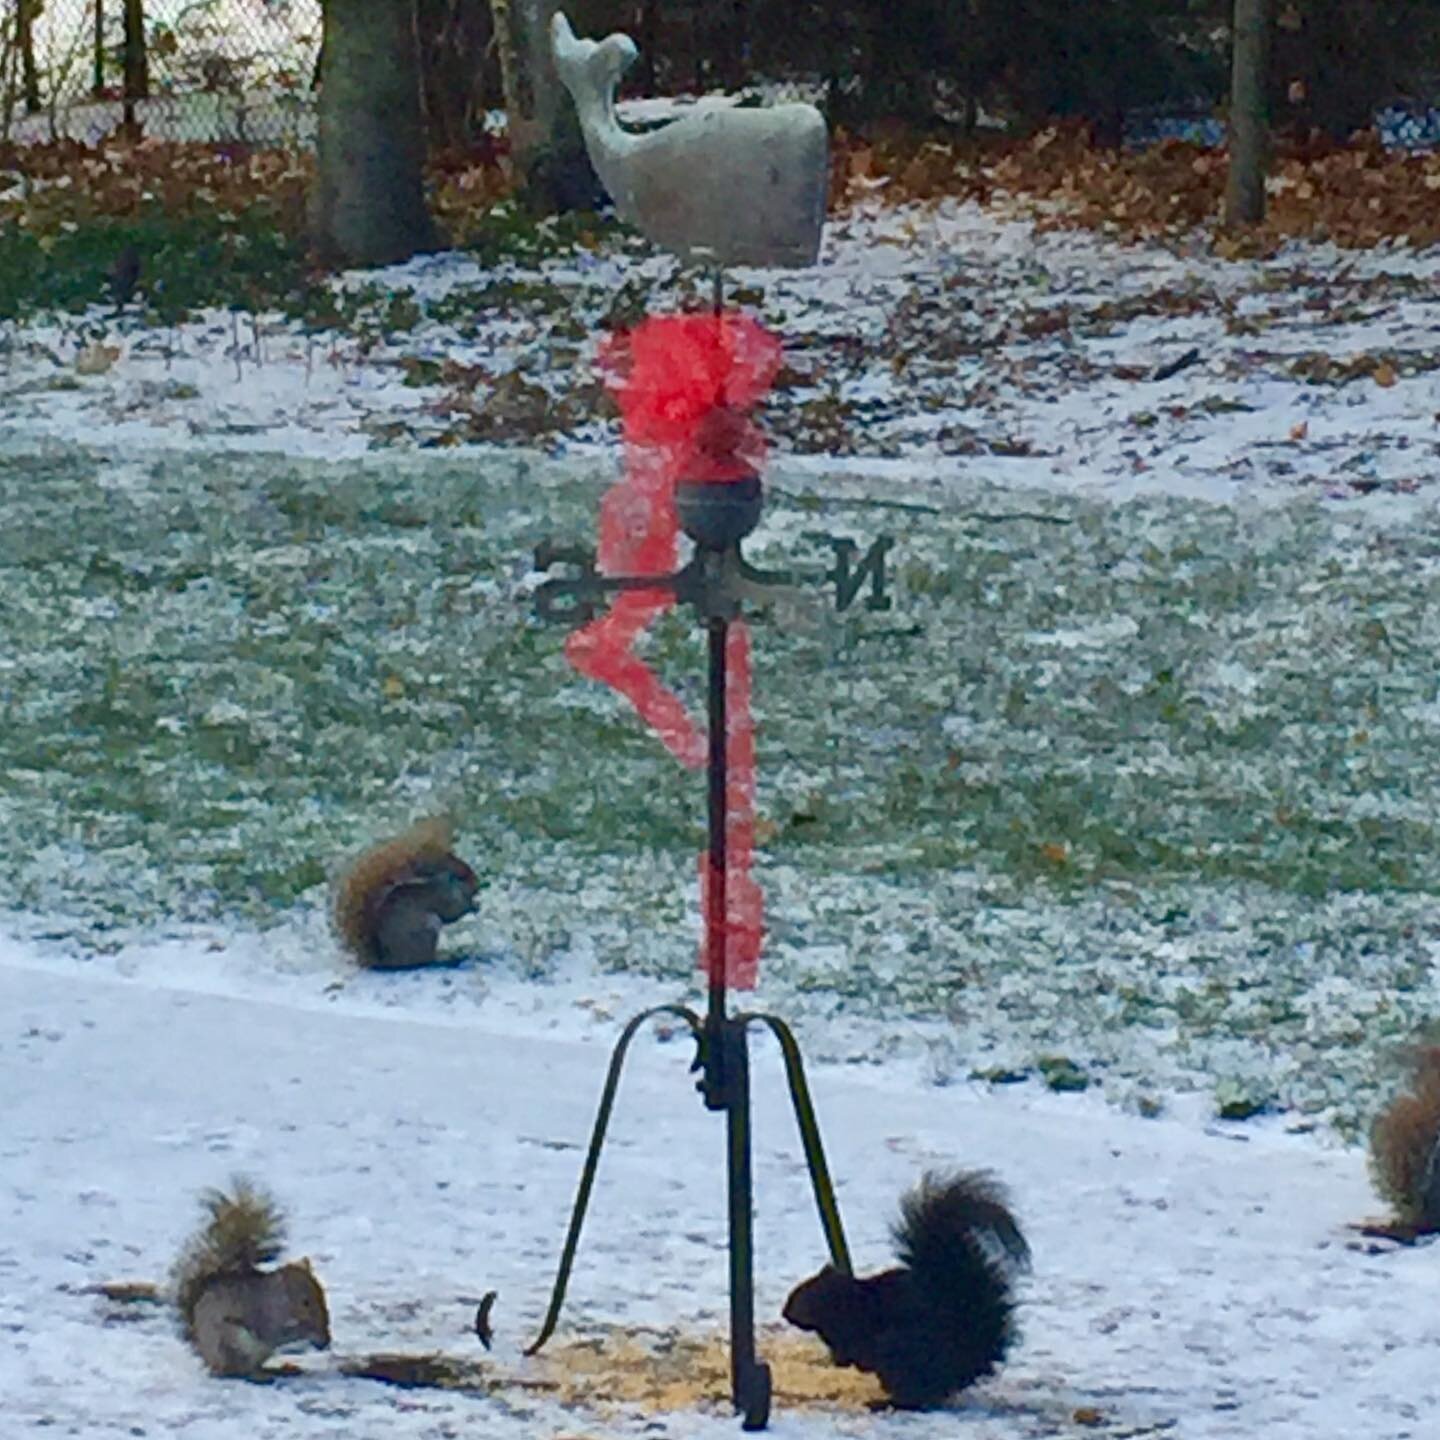 In more breaking news...
My dear uncle repaired our weather vane and we seem to have turned it into a squirrel feeding station for the winter. Does anyone else feed the squirrels or are you in the &lsquo;rats with tails&rsquo; camp? 🐿 
#covidcrazies